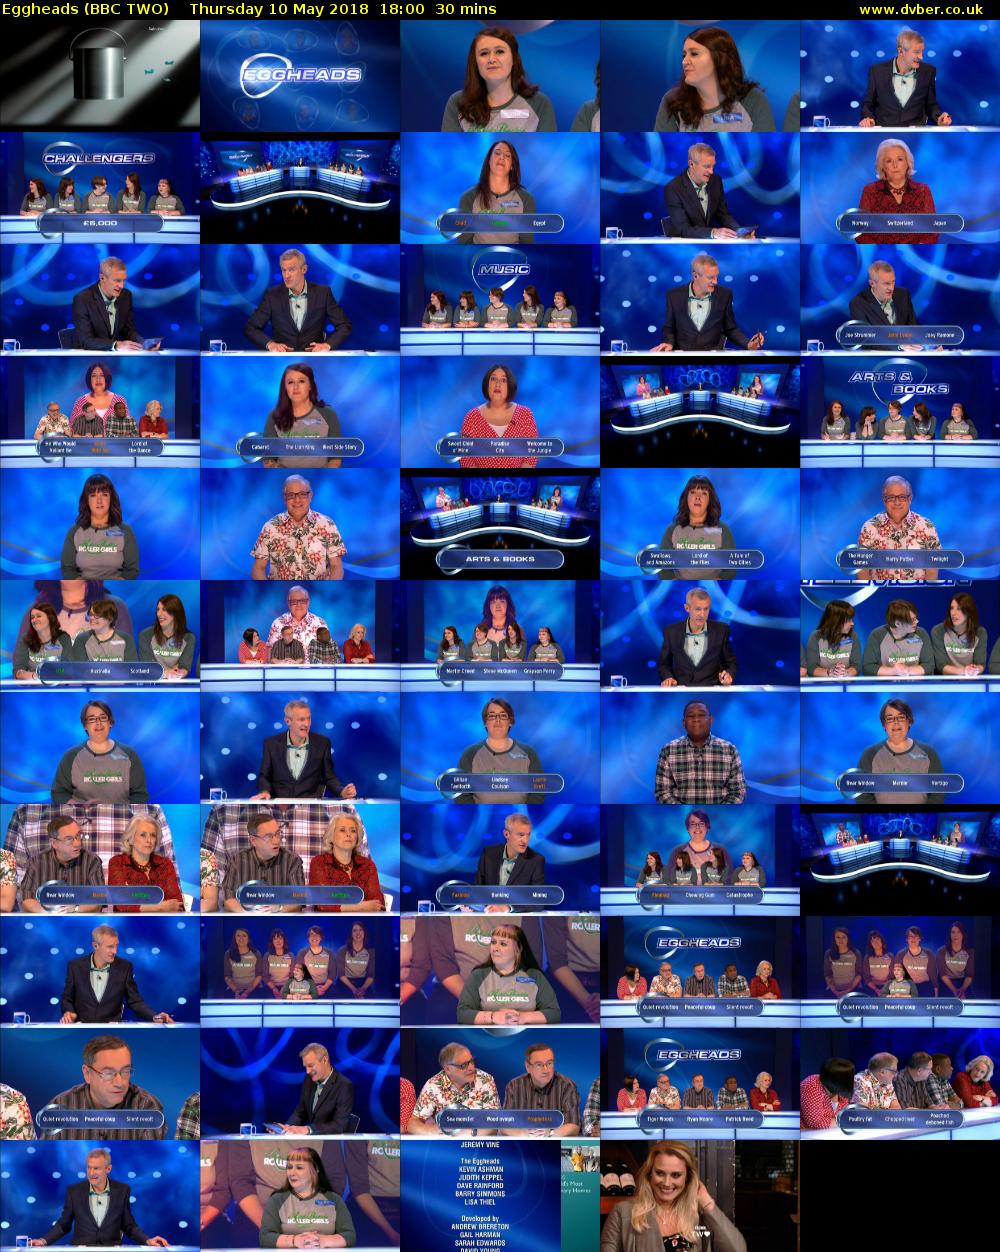 Eggheads (BBC TWO) Thursday 10 May 2018 18:00 - 18:30